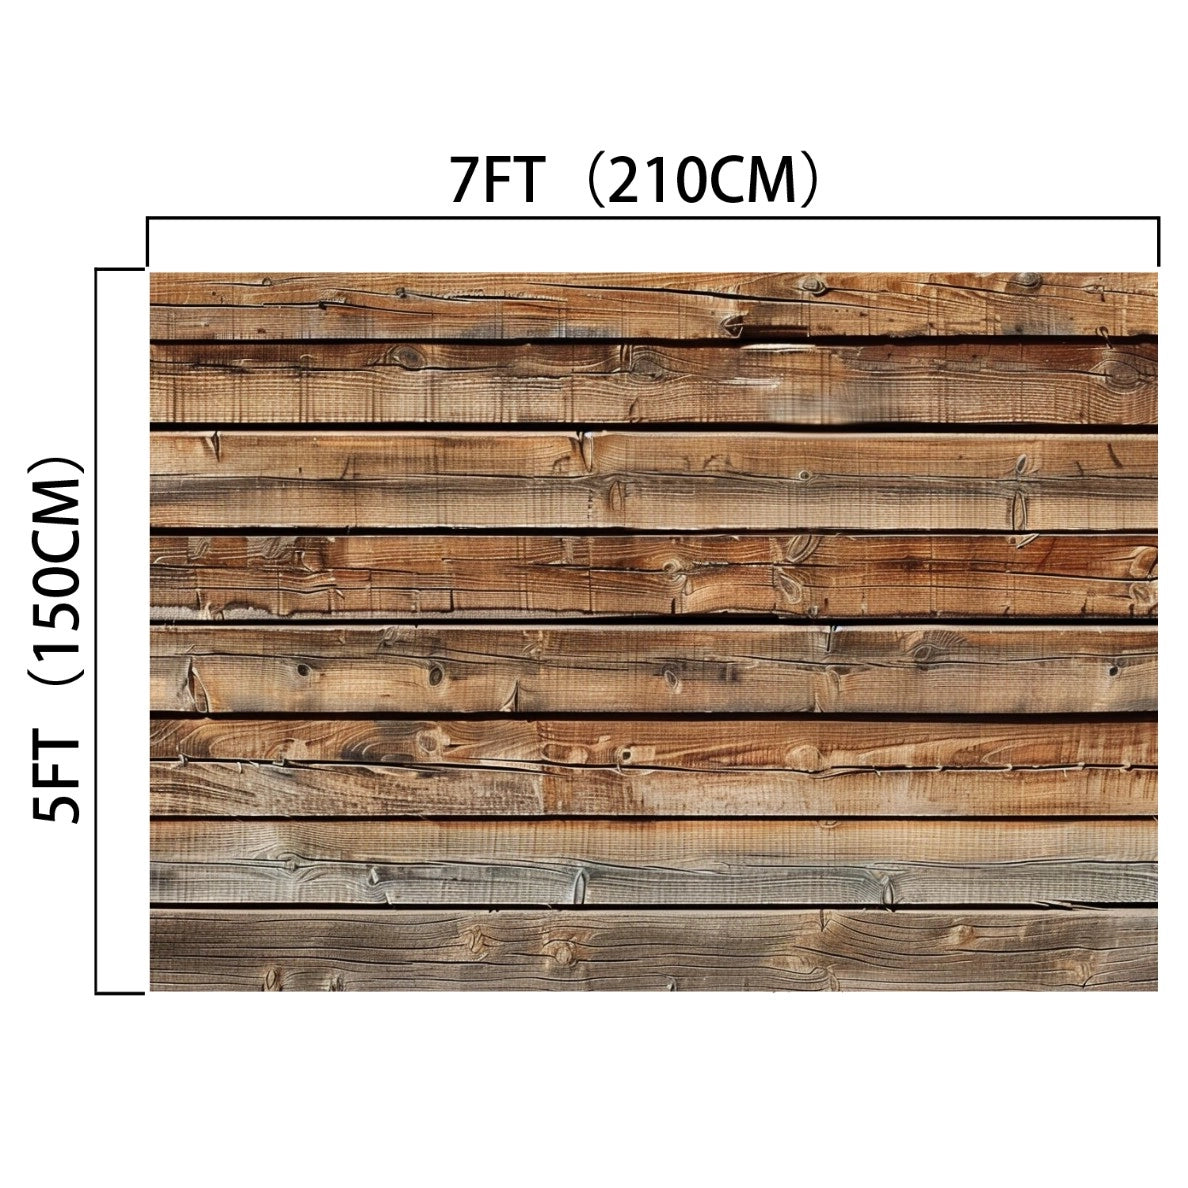 Backdrop image of a 7x5ft Wood Backdrops for Photography Worn Wooden Boards Background Brown Photo Wall Photo Studio by ideasbackdrop featuring horizontal rustic wooden planks, with labeled dimensions: 7 feet (210 cm) wide and 5 feet (150 cm) high. Perfect for wood photography props and designed for wrinkle resistance.